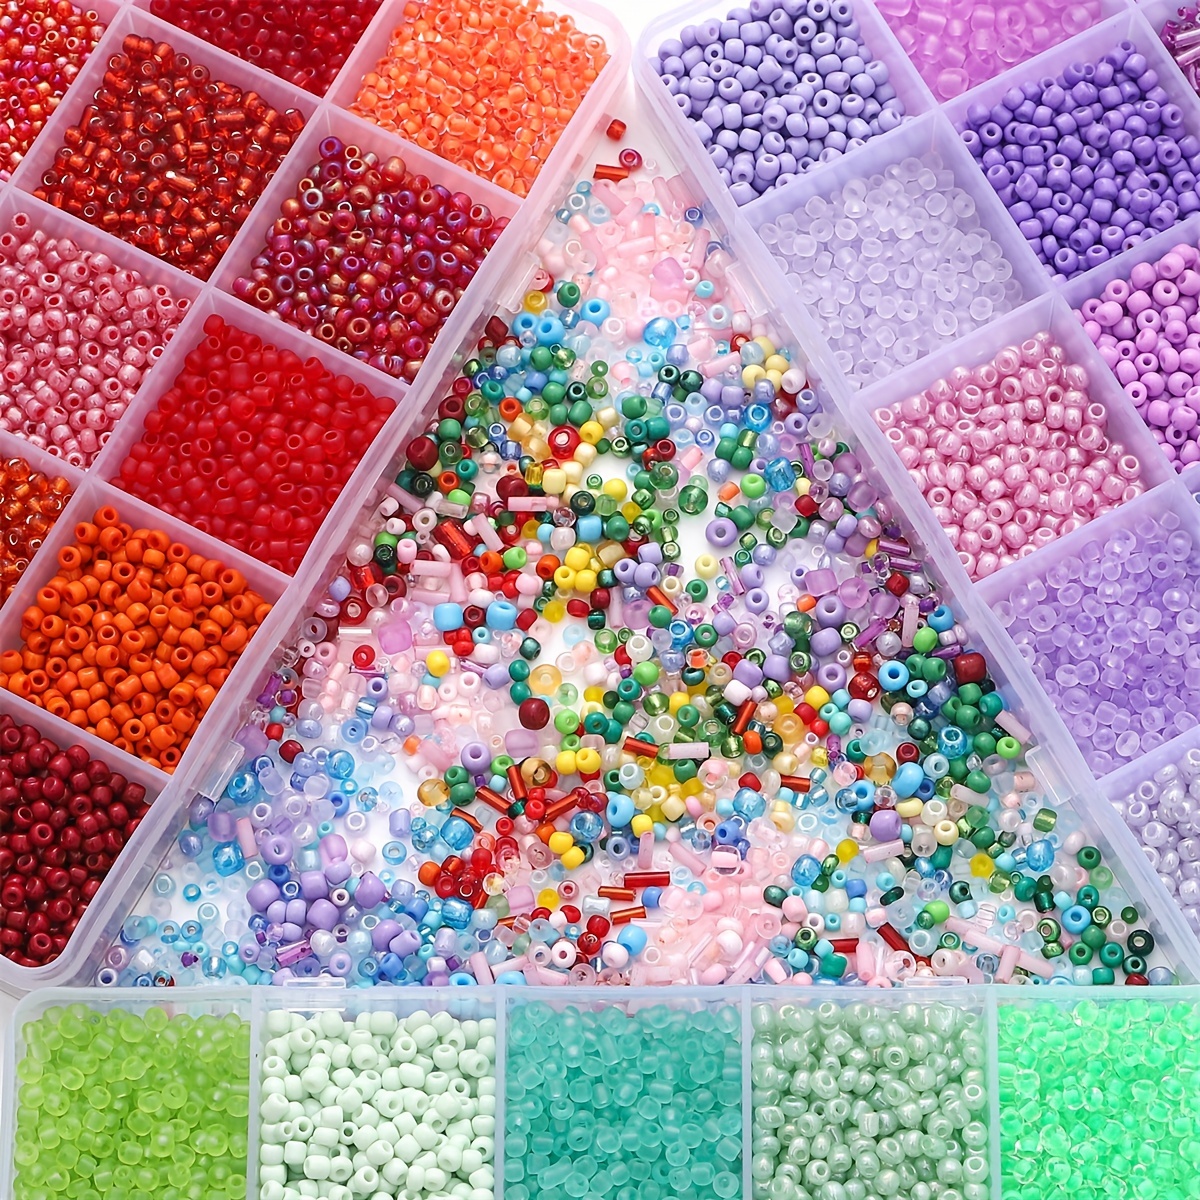 2mm Seed Beads for Jewelry Making Kit - 24 Color Mini Round Beads 24000 PCS  Glass Seed Beads Small Pony Beads Kit Bulk Beading Supplies for Crafts